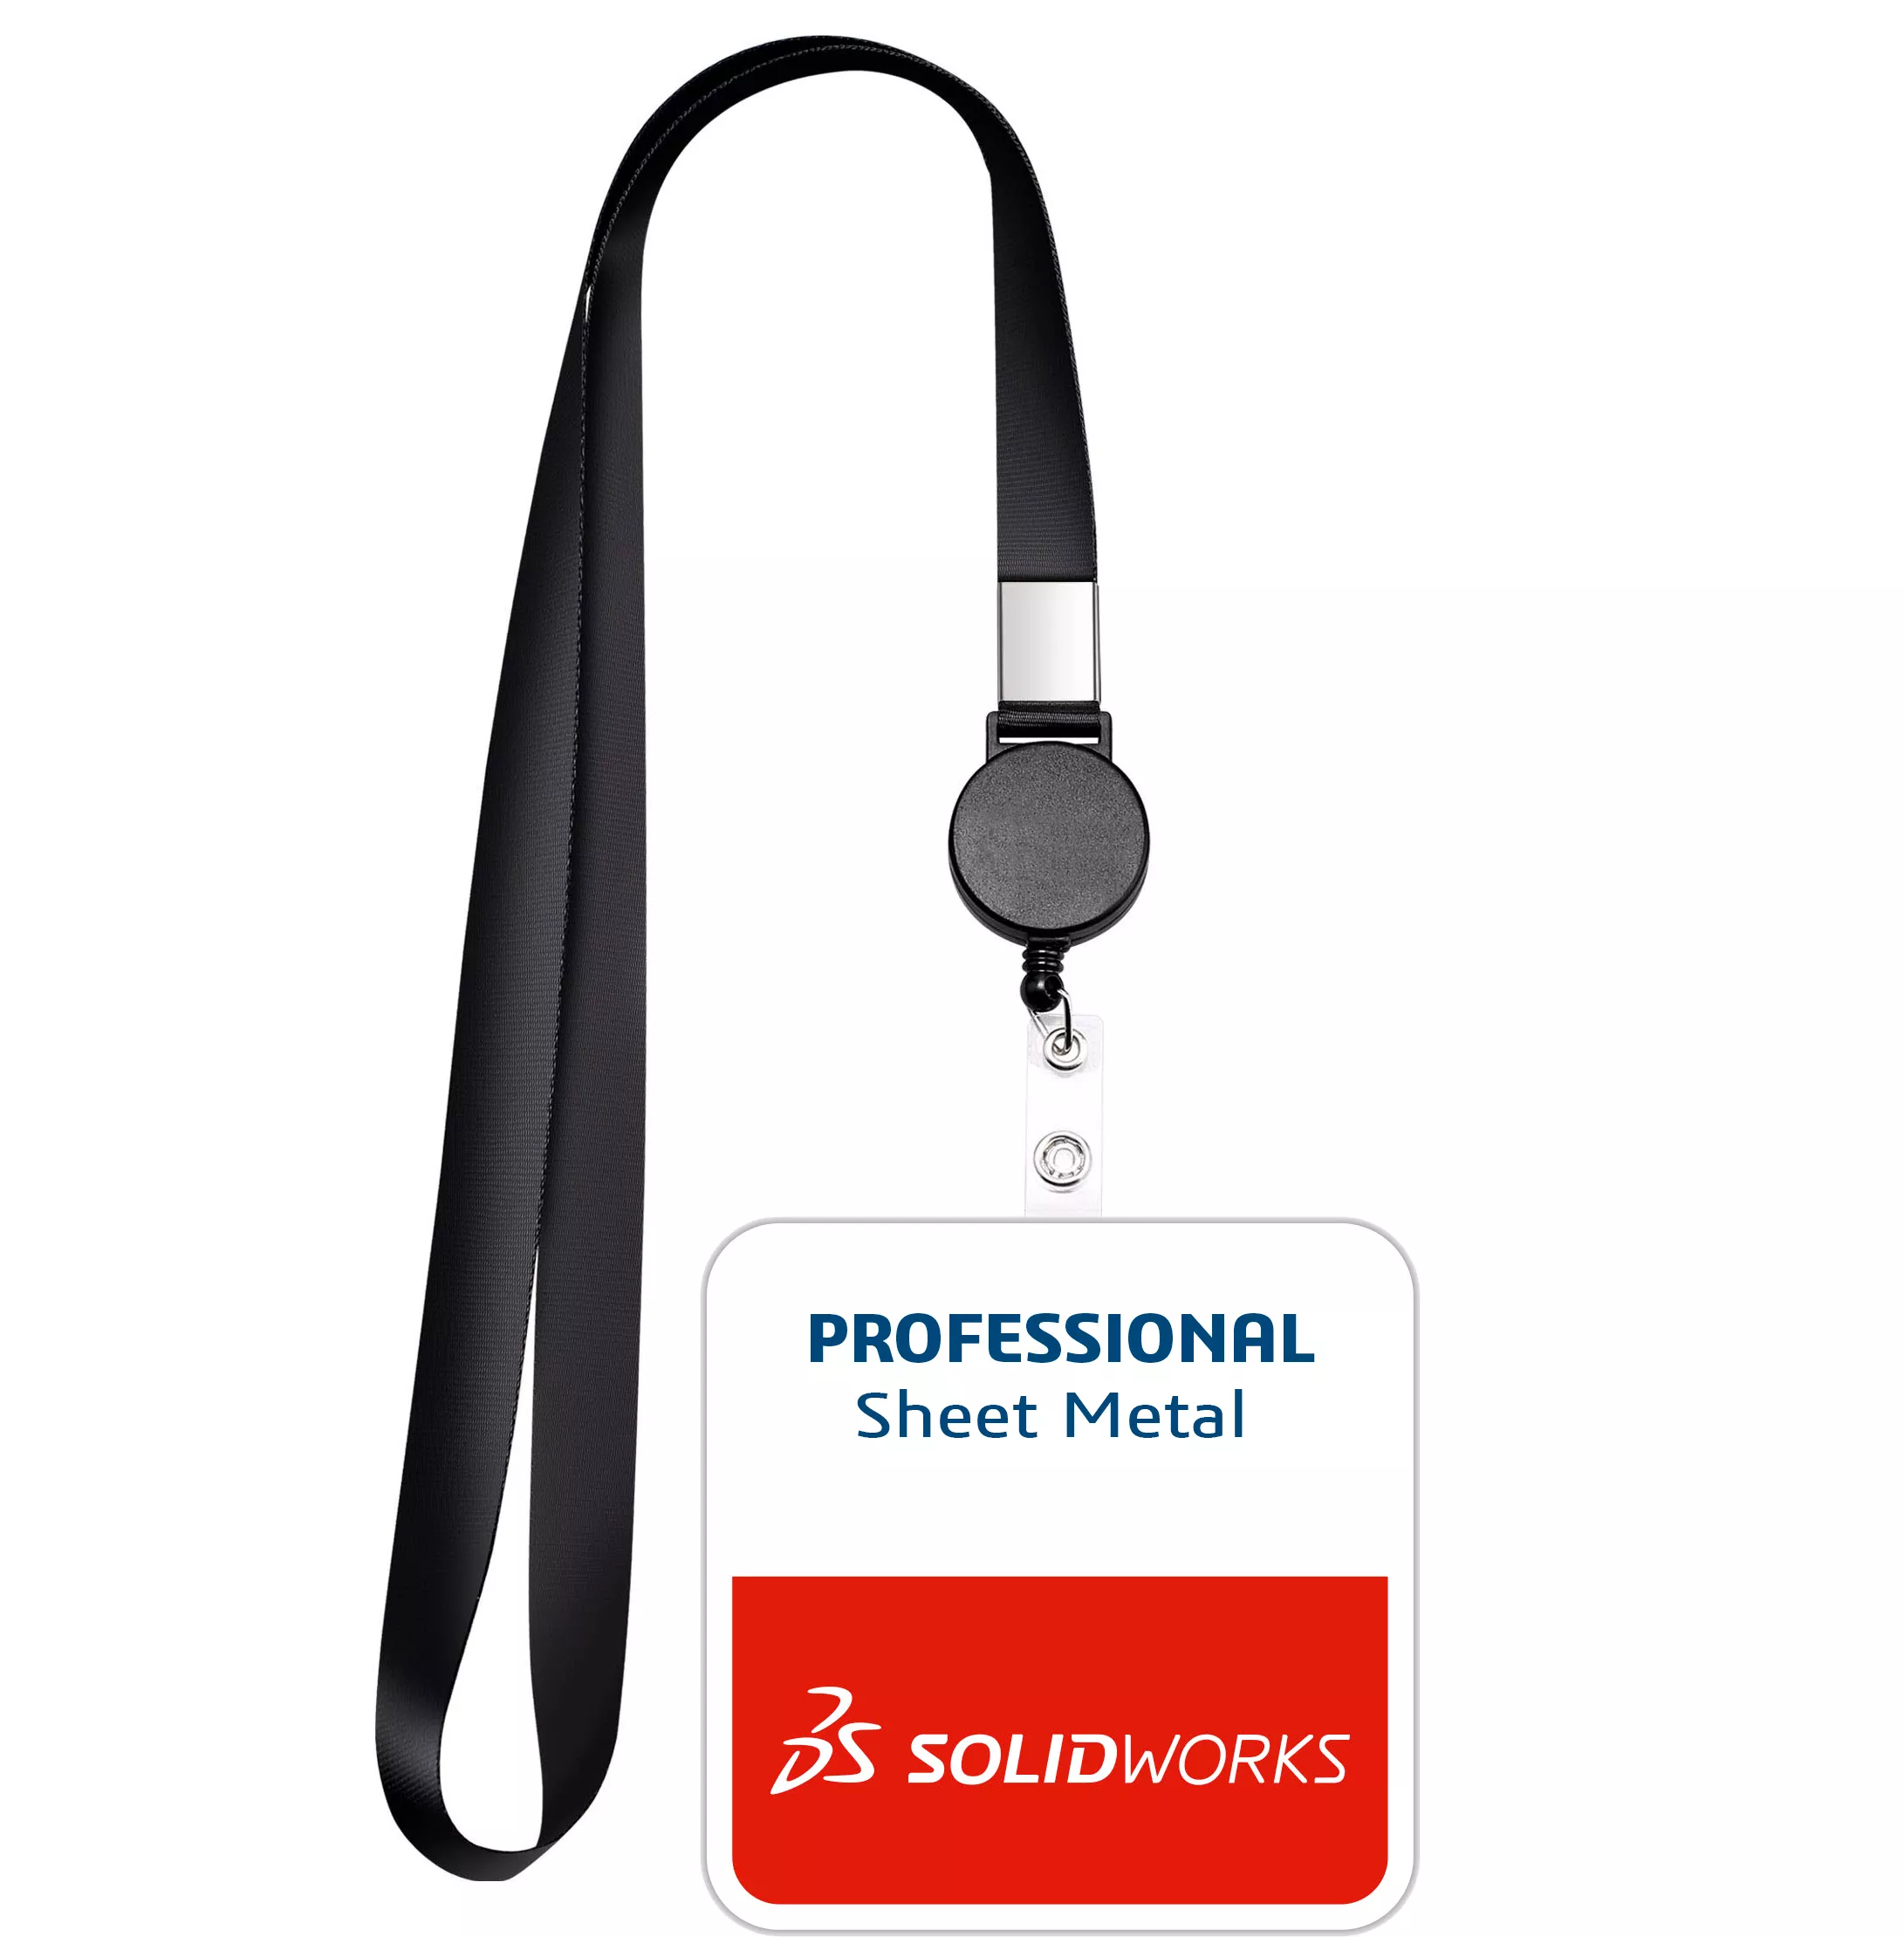 What skills may be required to pass the SOLIDWORKS CSWPA-Sheet Metal exam?